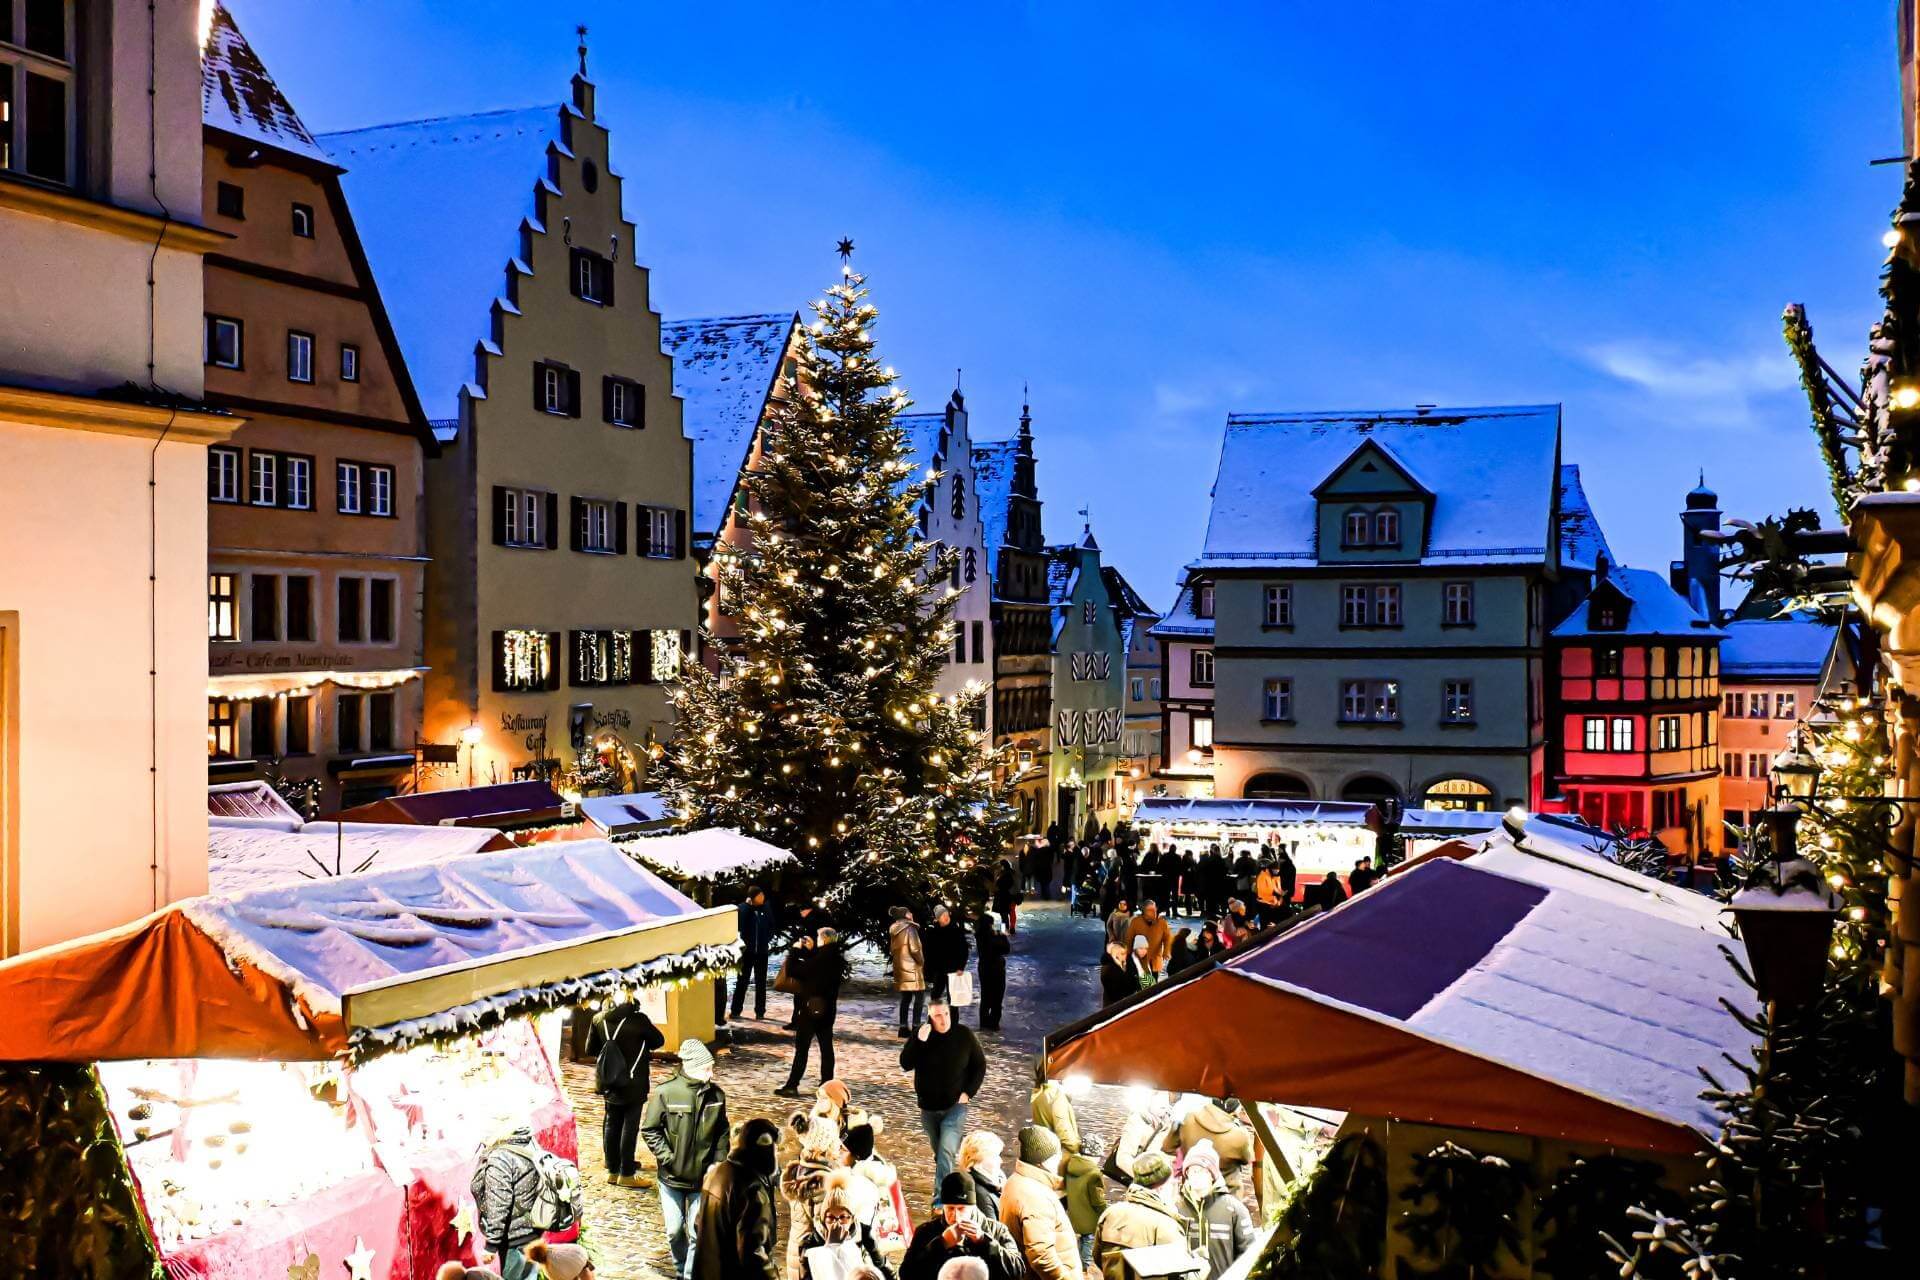 Rothenburg ob der Tauber Christmas Market - Marketplace with illuminated Christmas tree and decorated market stalls - angiestravelroutes.com